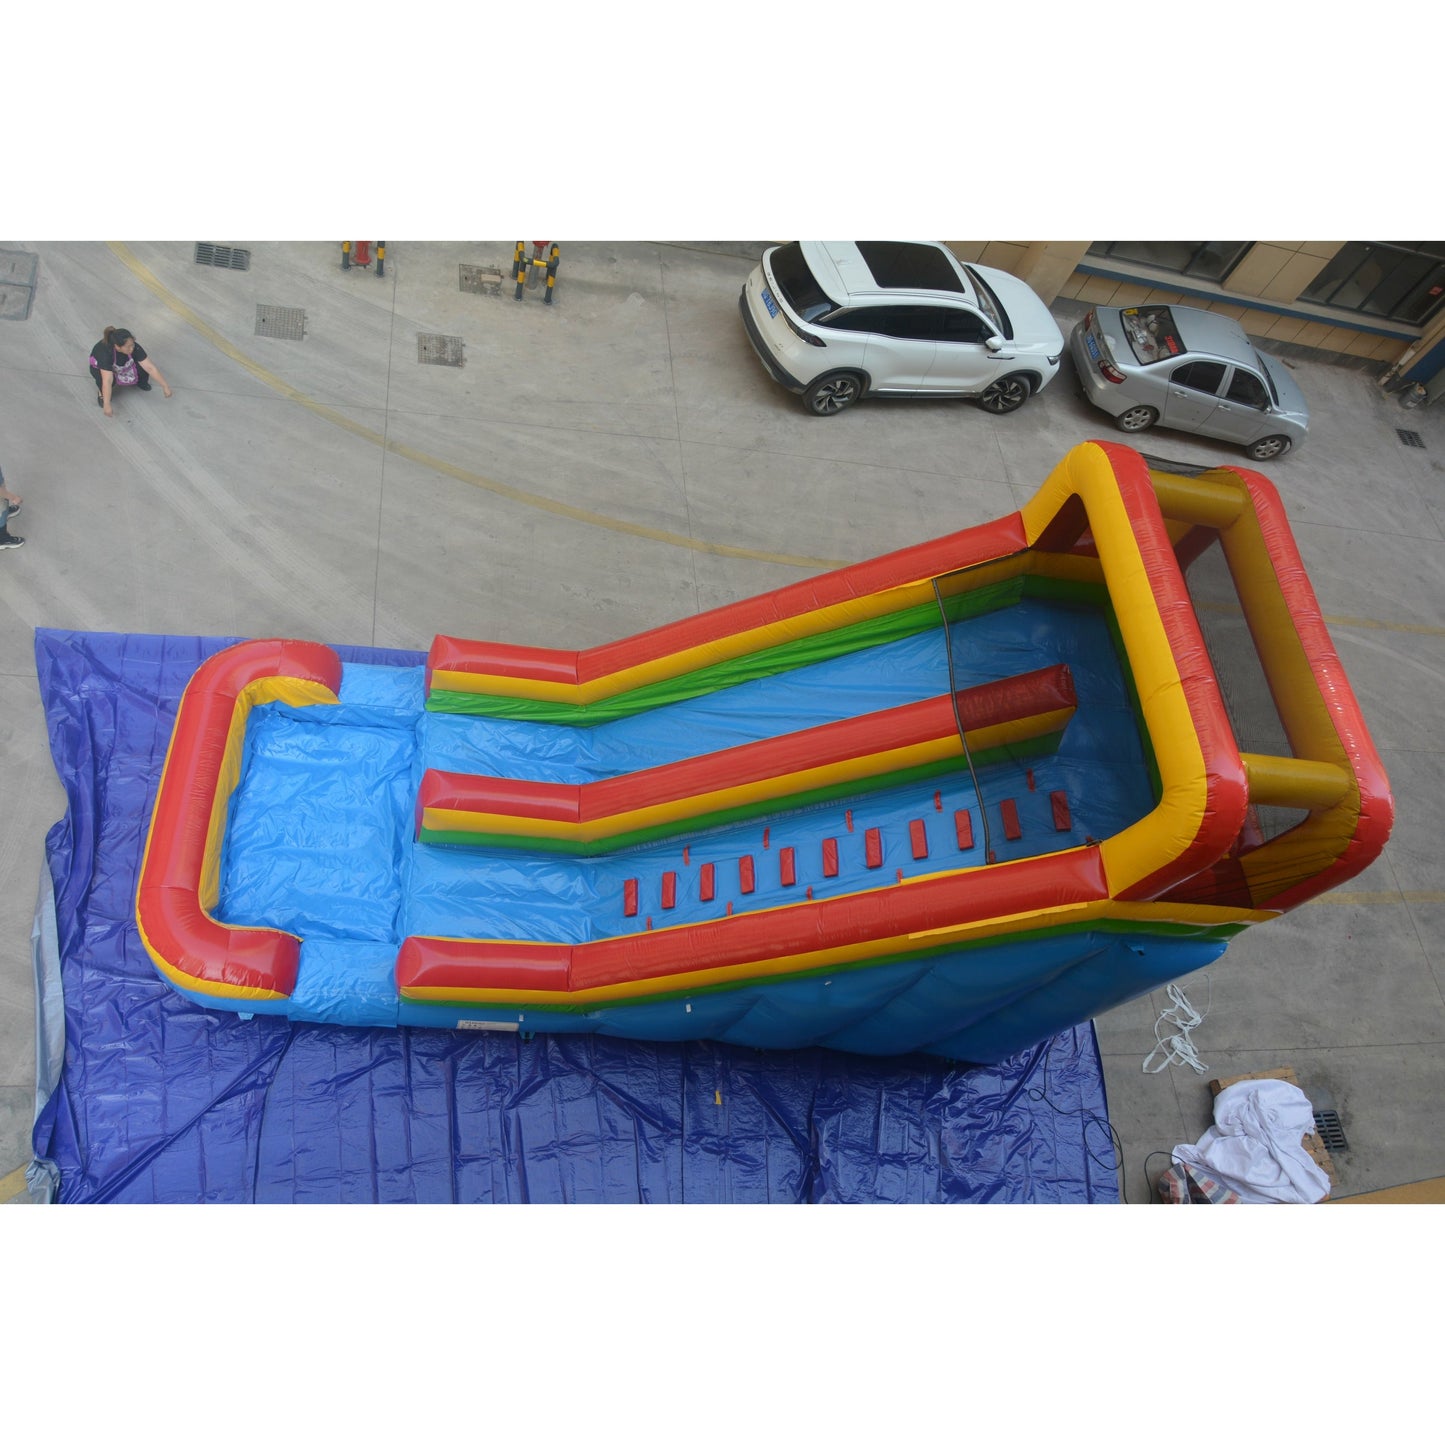 25’ x 11' x 15'H Wet/Dry Commercial-grade Inflatable Water Slide